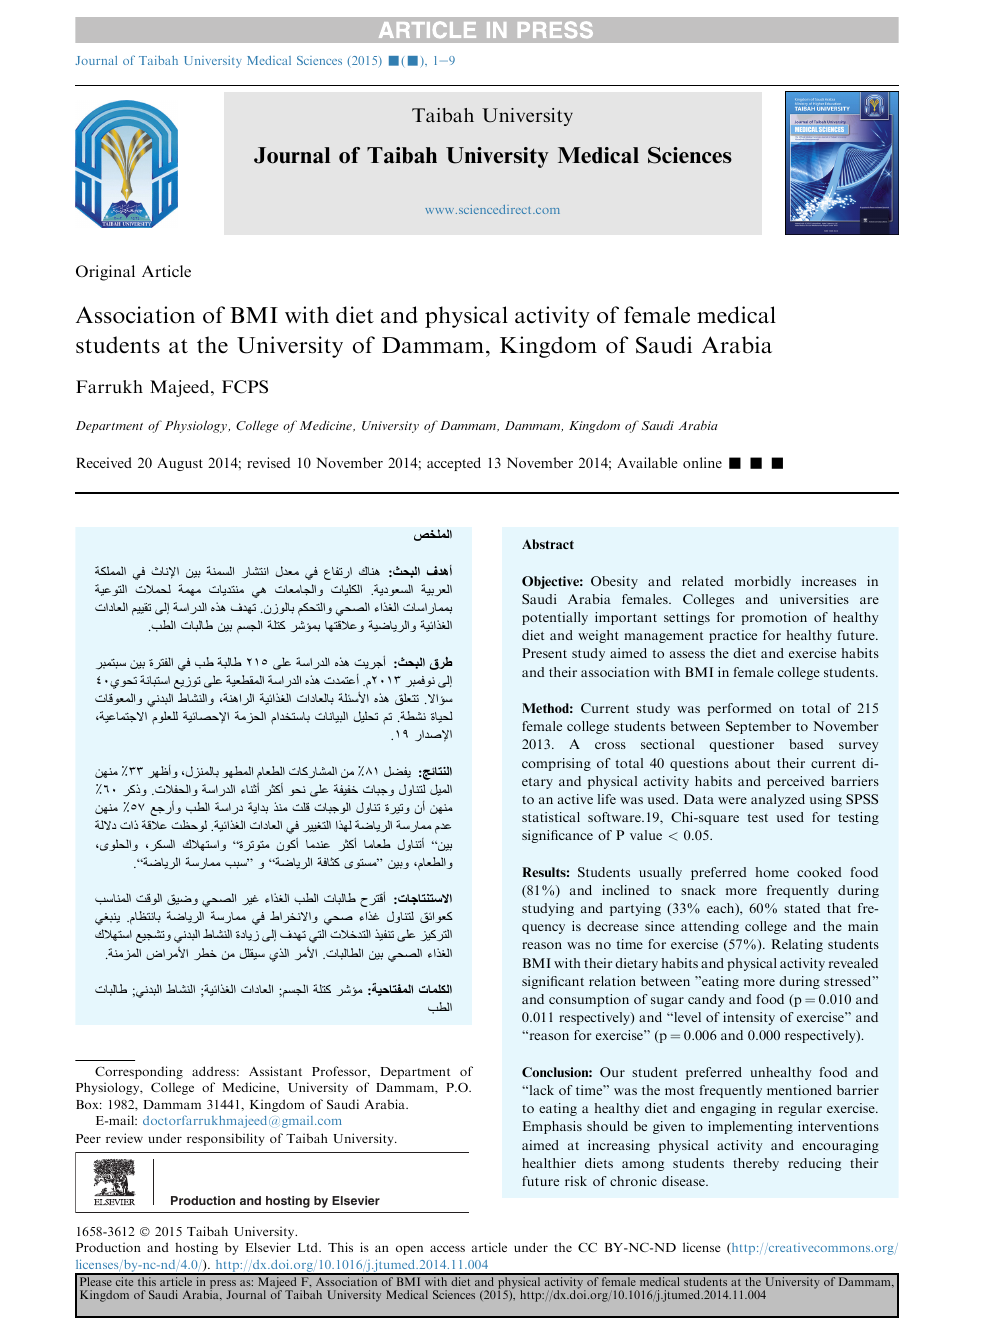 Association Of Bmi With Diet And Physical Activity Of Female Medical Students At The University Of Dammam Kingdom Of Saudi Arabia Topic Of Research Paper In Health Sciences Download Scholarly Article